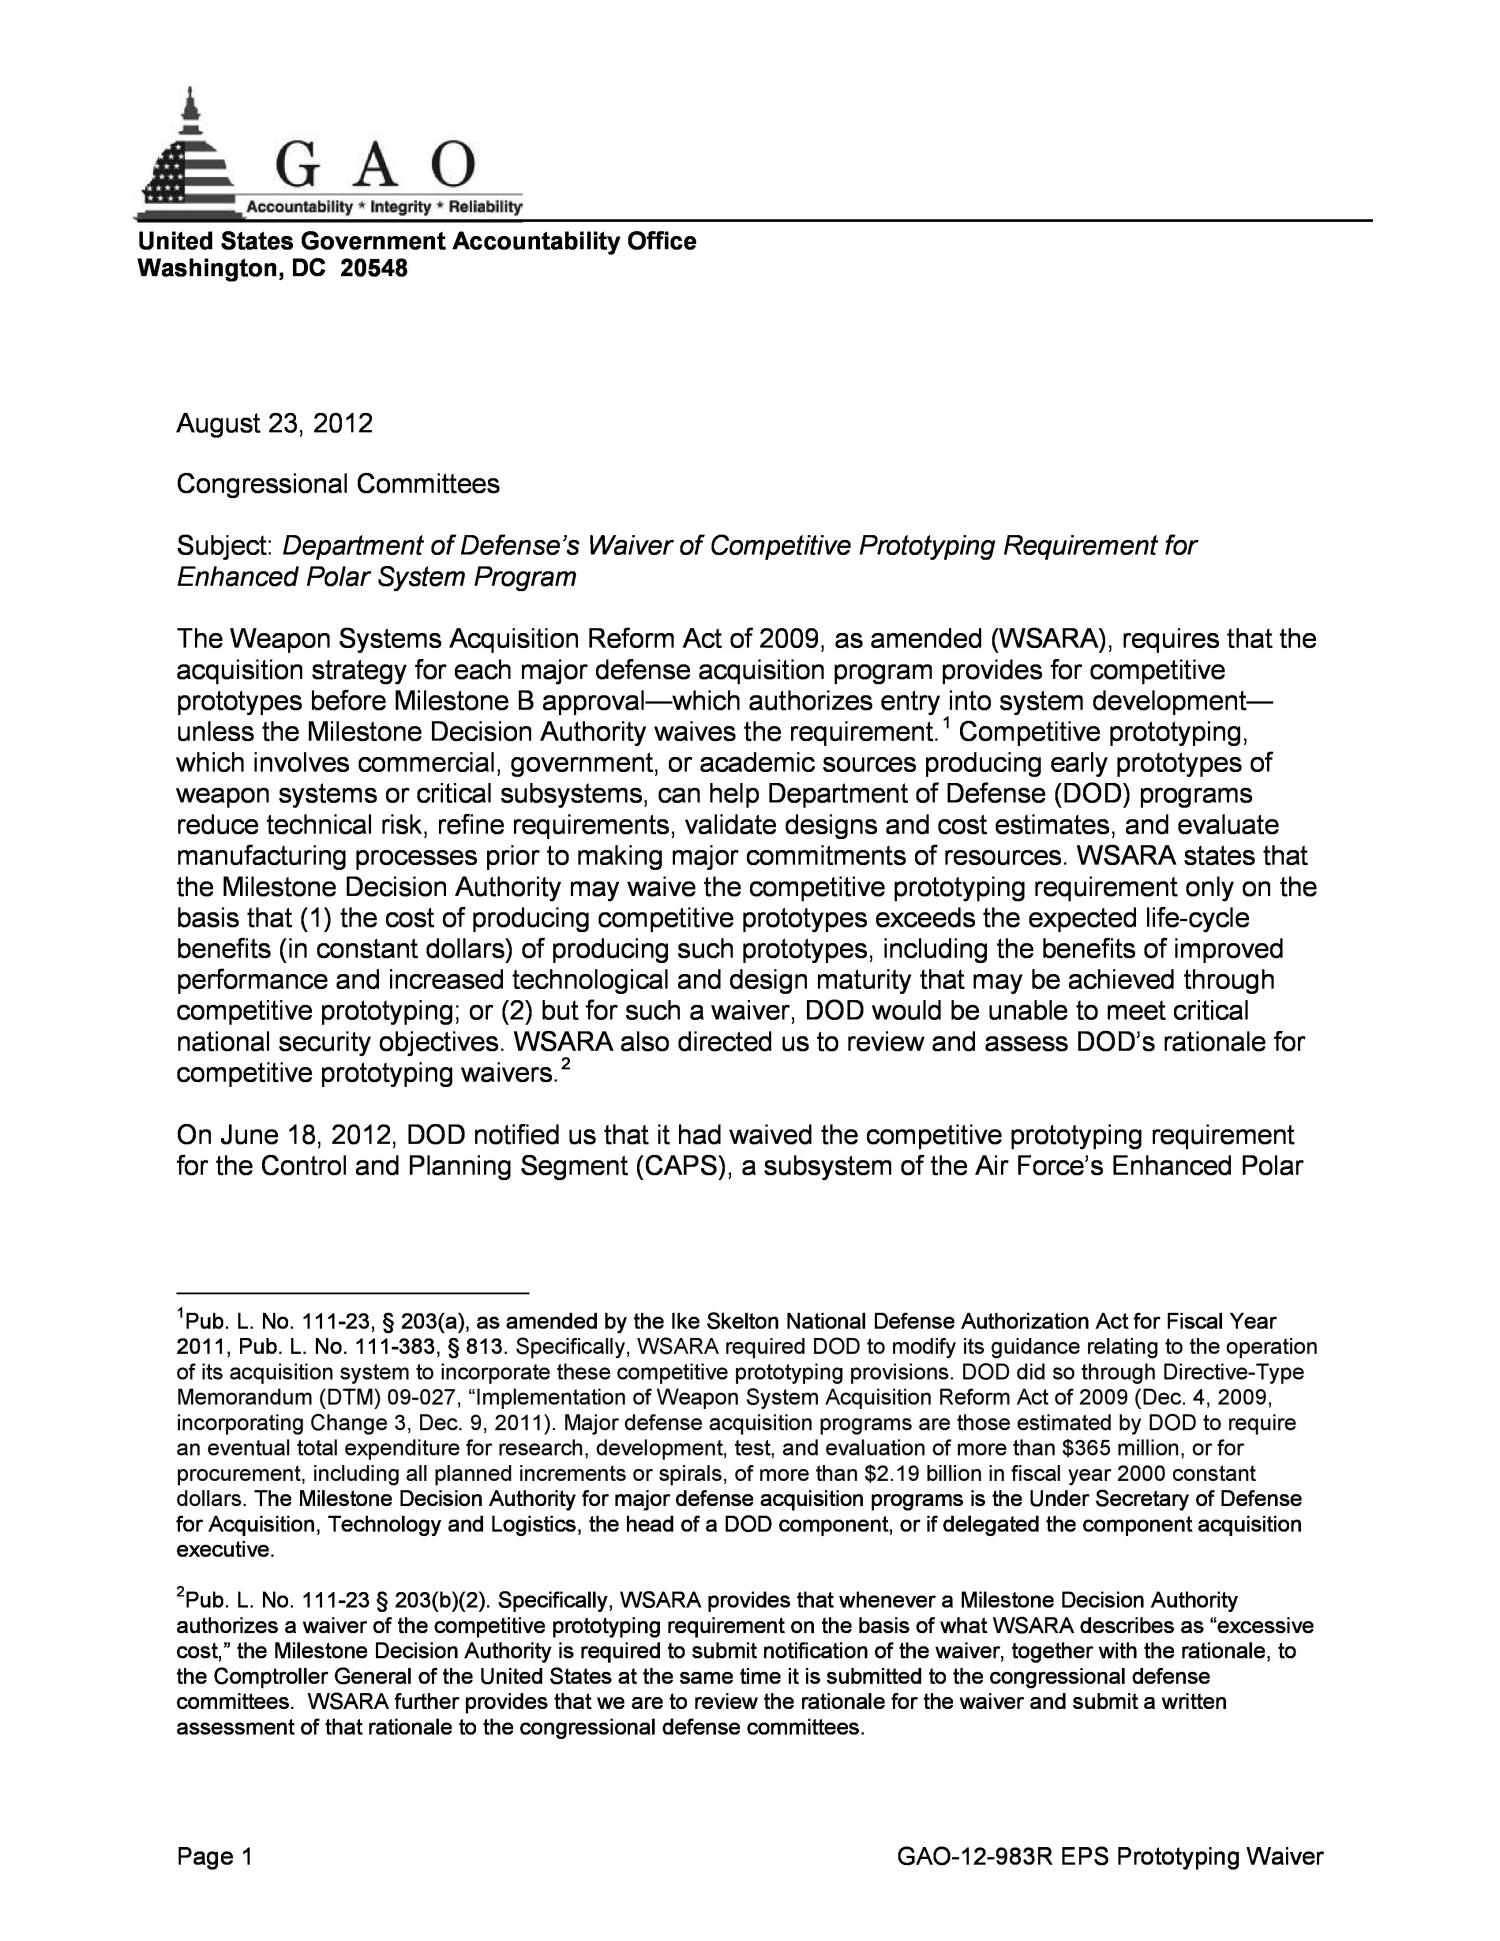 Department of Defense's Waiver of Competitive Prototyping Requirement for Enhanced Polar System Program
                                                
                                                    [Sequence #]: 1 of 11
                                                